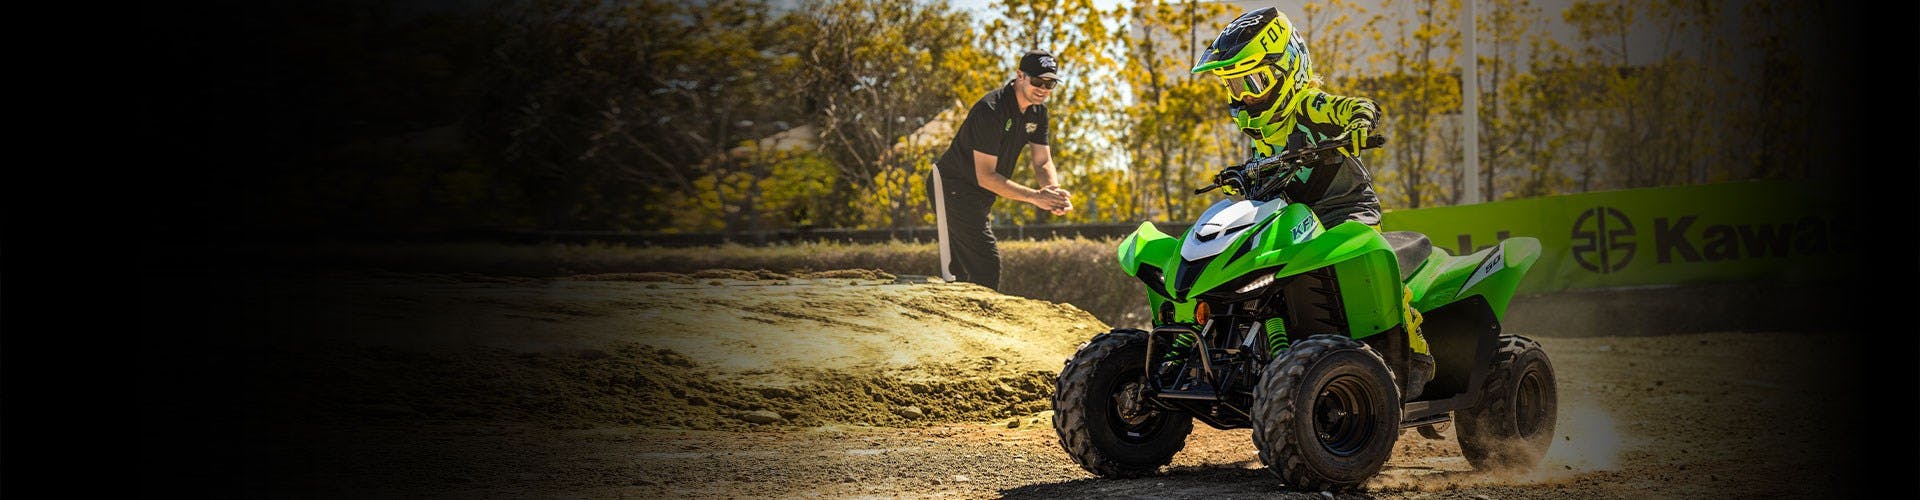 Kawasaki KFX50 in lime green colour on off road track